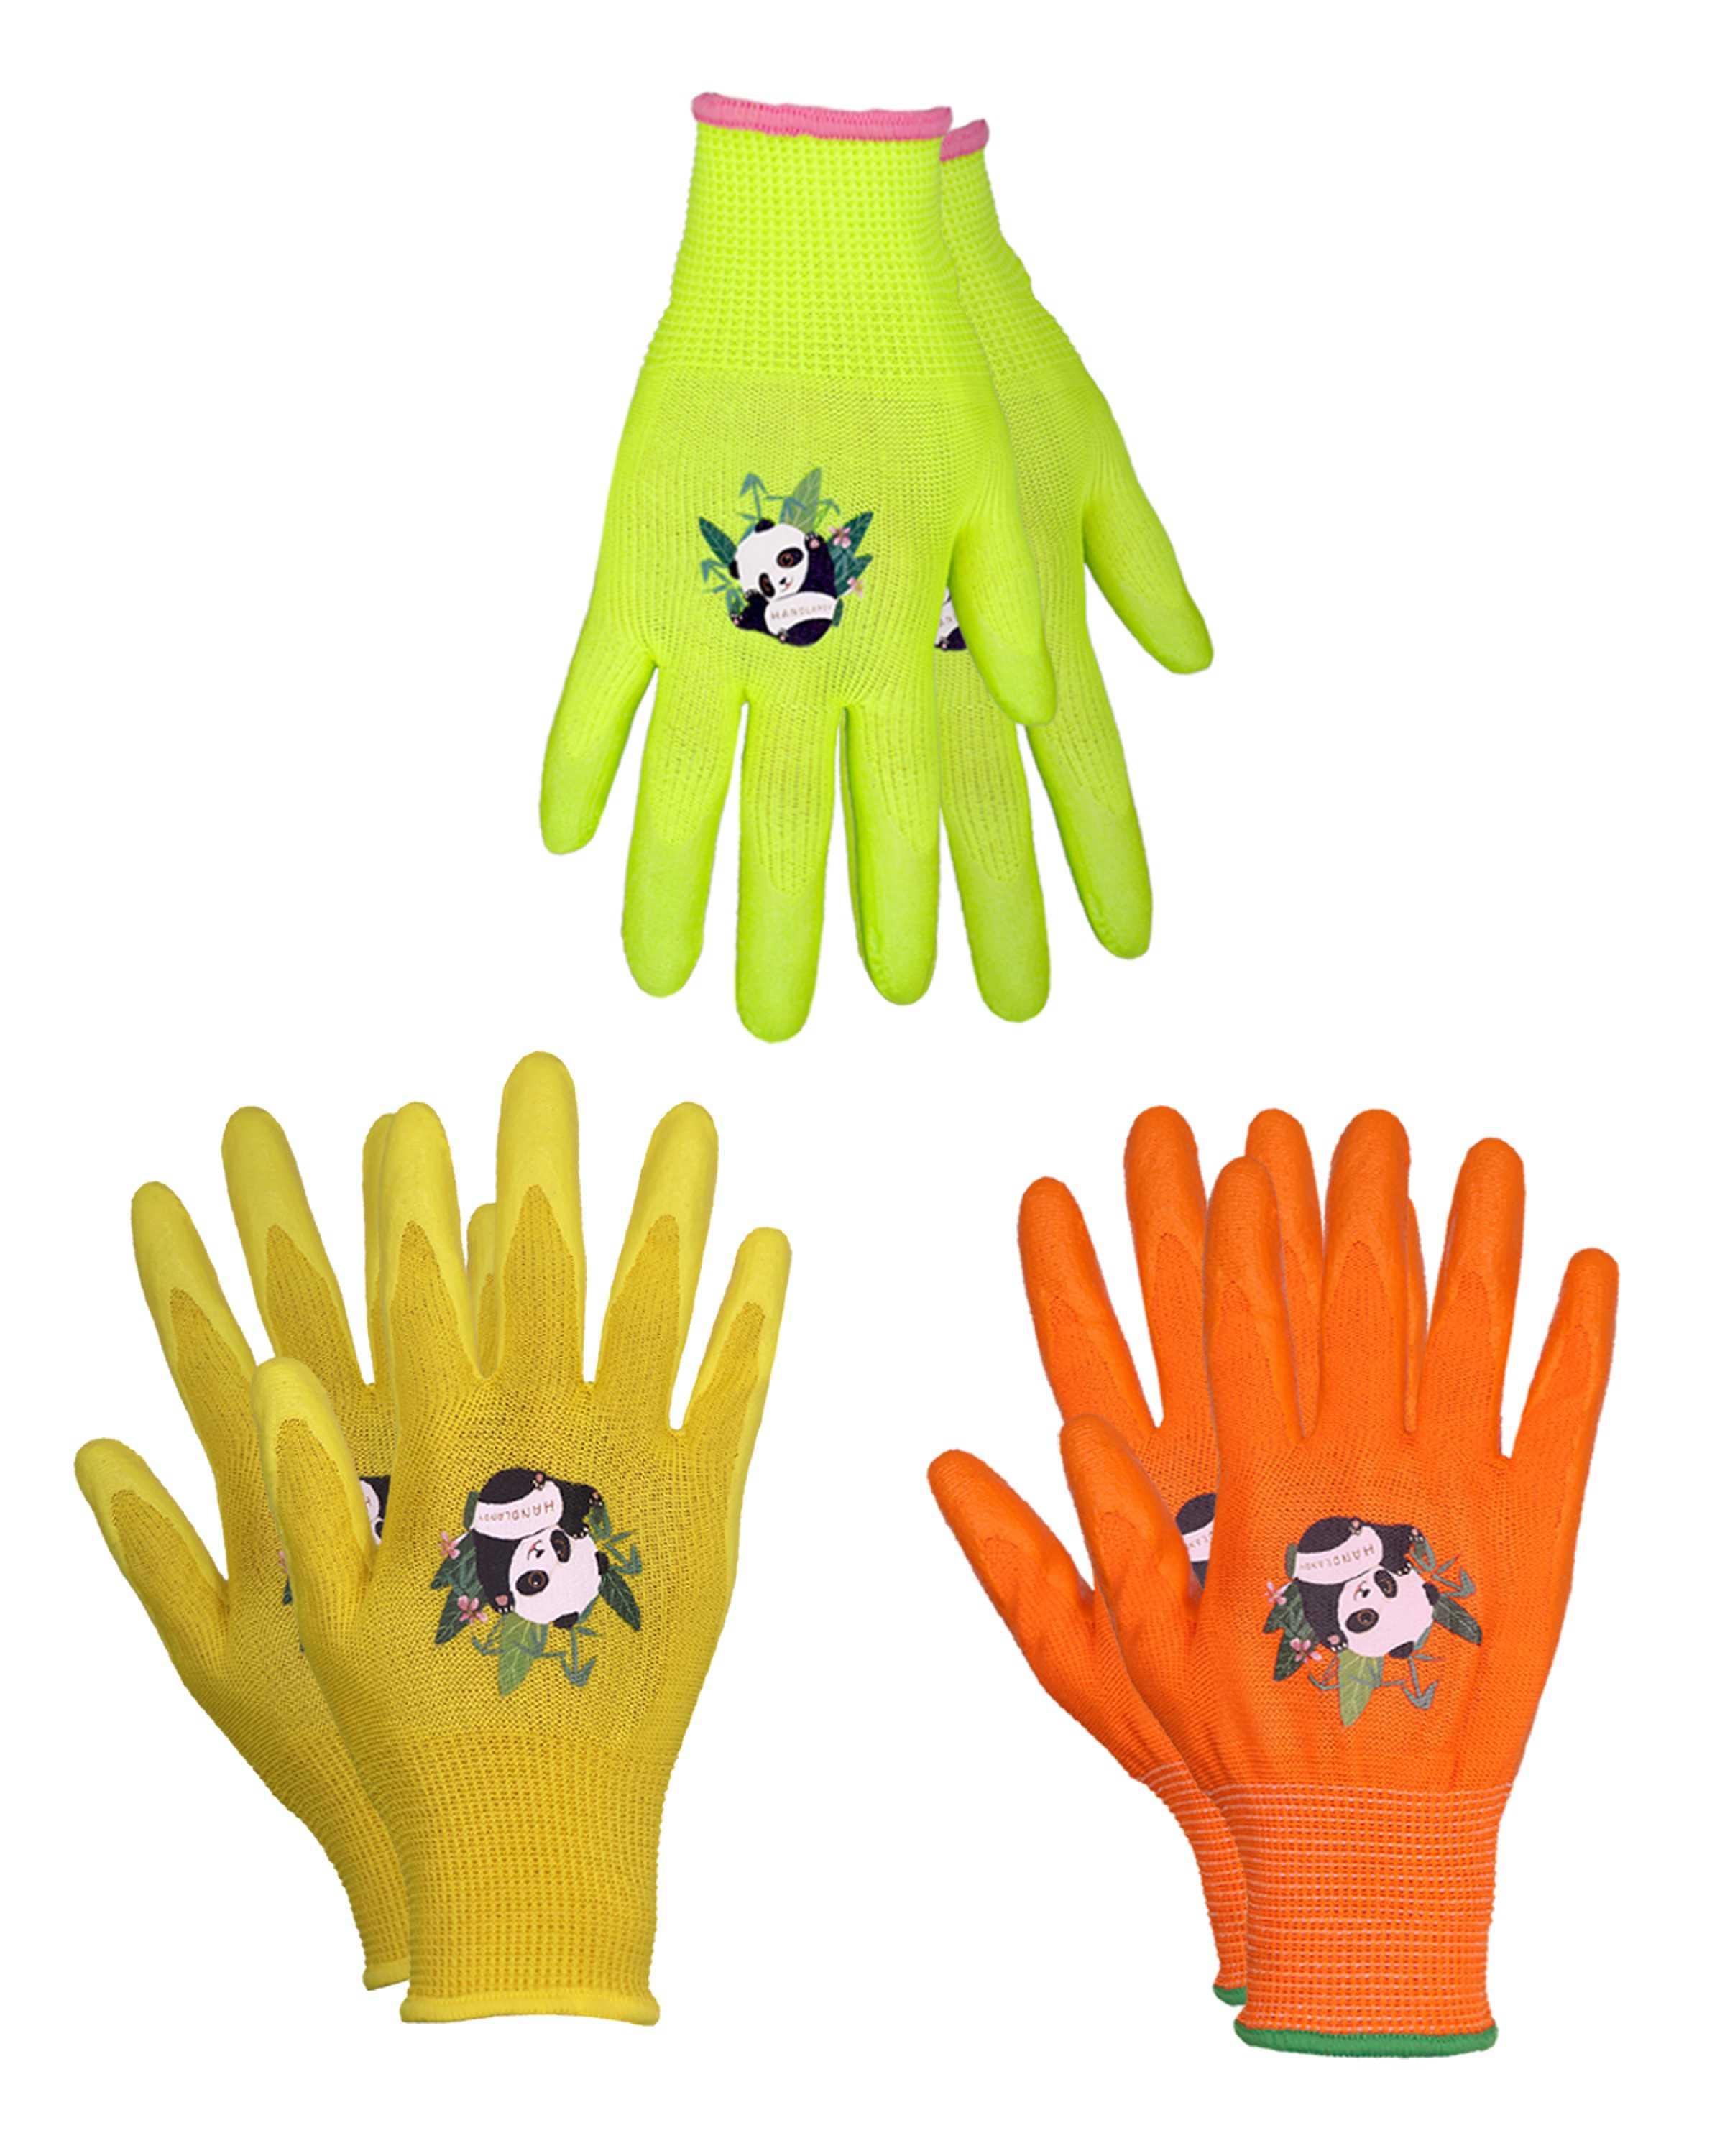 5140 PRISAFETY Mini Size for Ages 6-8 Comfortable Durable Children Size Work Gloves Garden Gloves for Kids